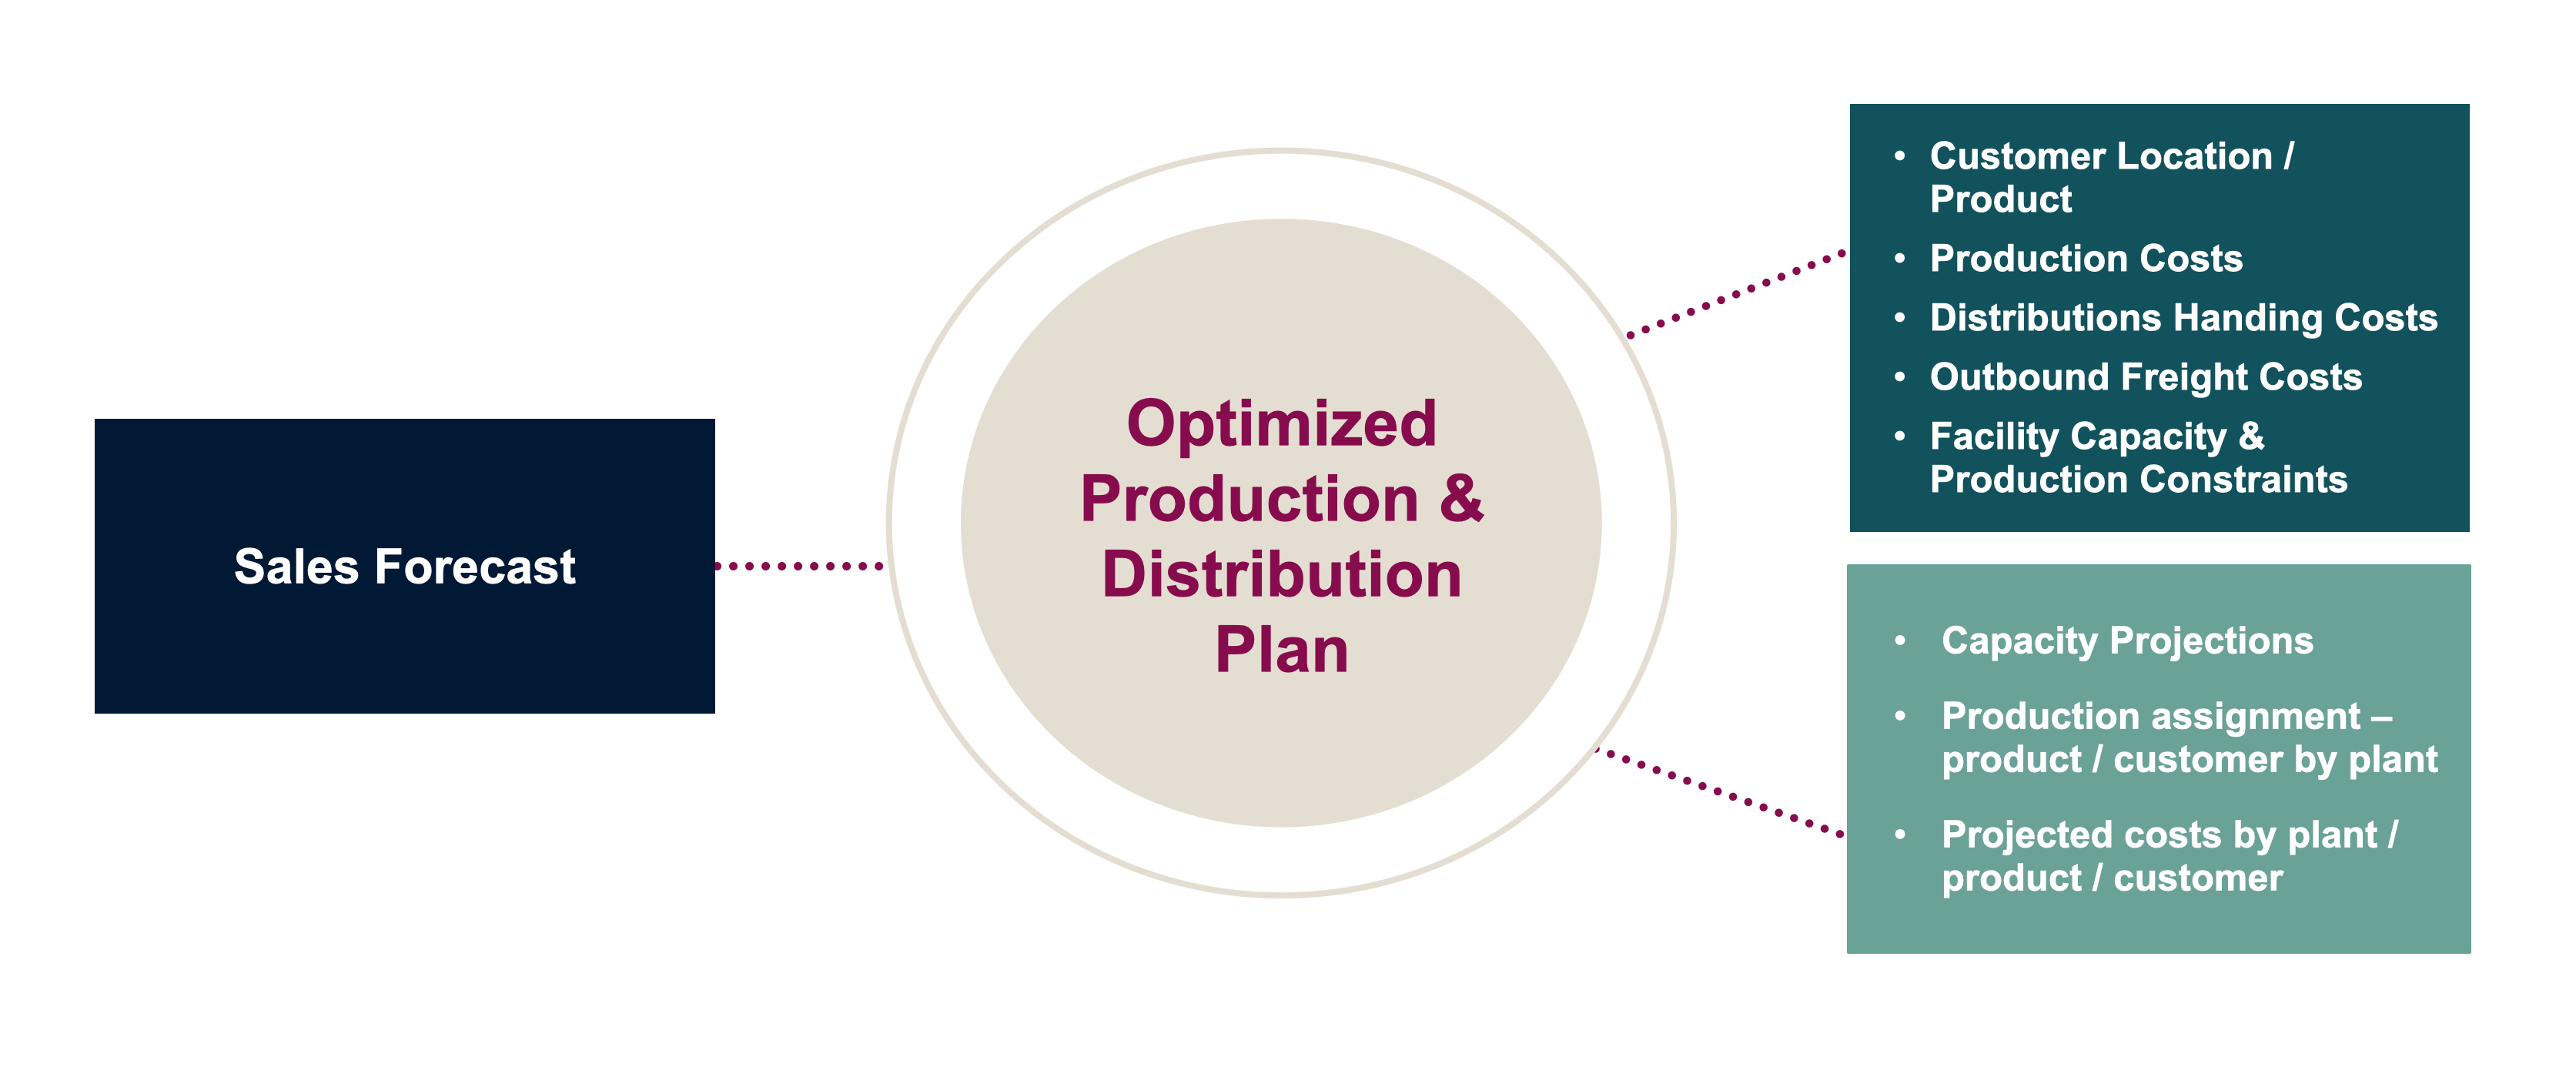 Using your sales forecast, we create an optimized production and distribution plan.